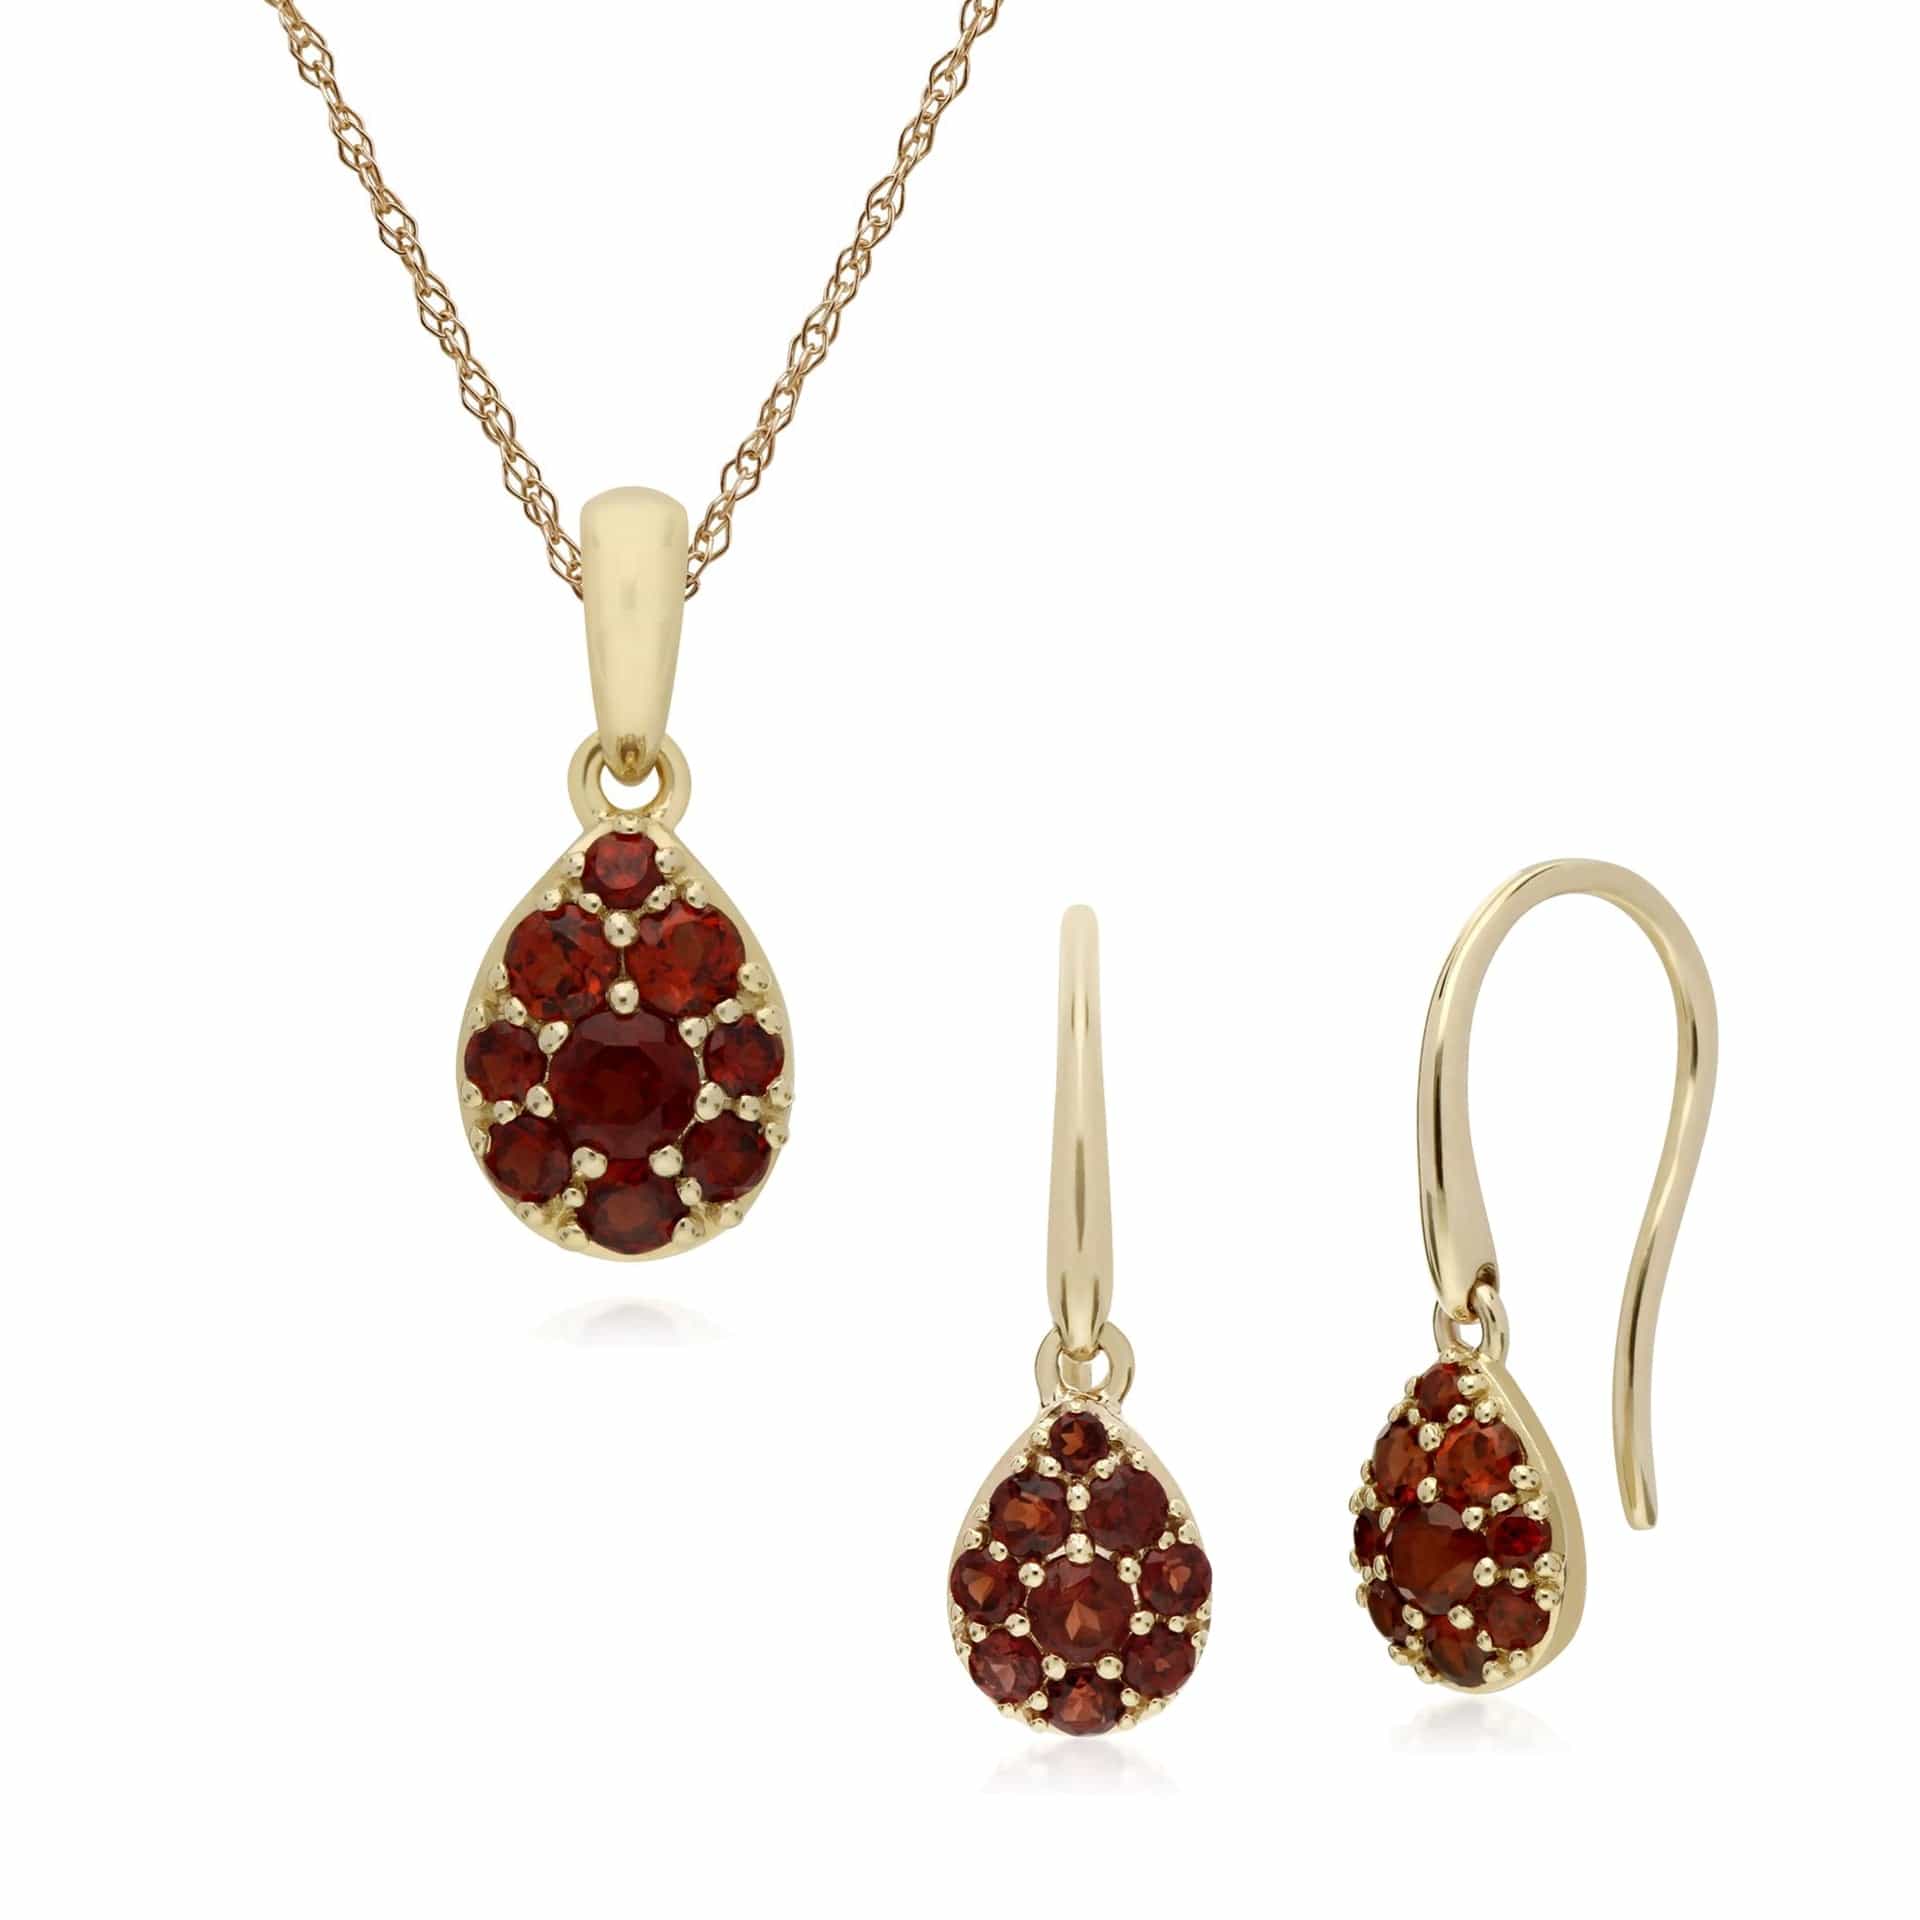 135E1574039-135P1909039 Classic Round Garnet Pear Cluster Drop Earrings & Pendant Set in 9ct Yellow Gold 1